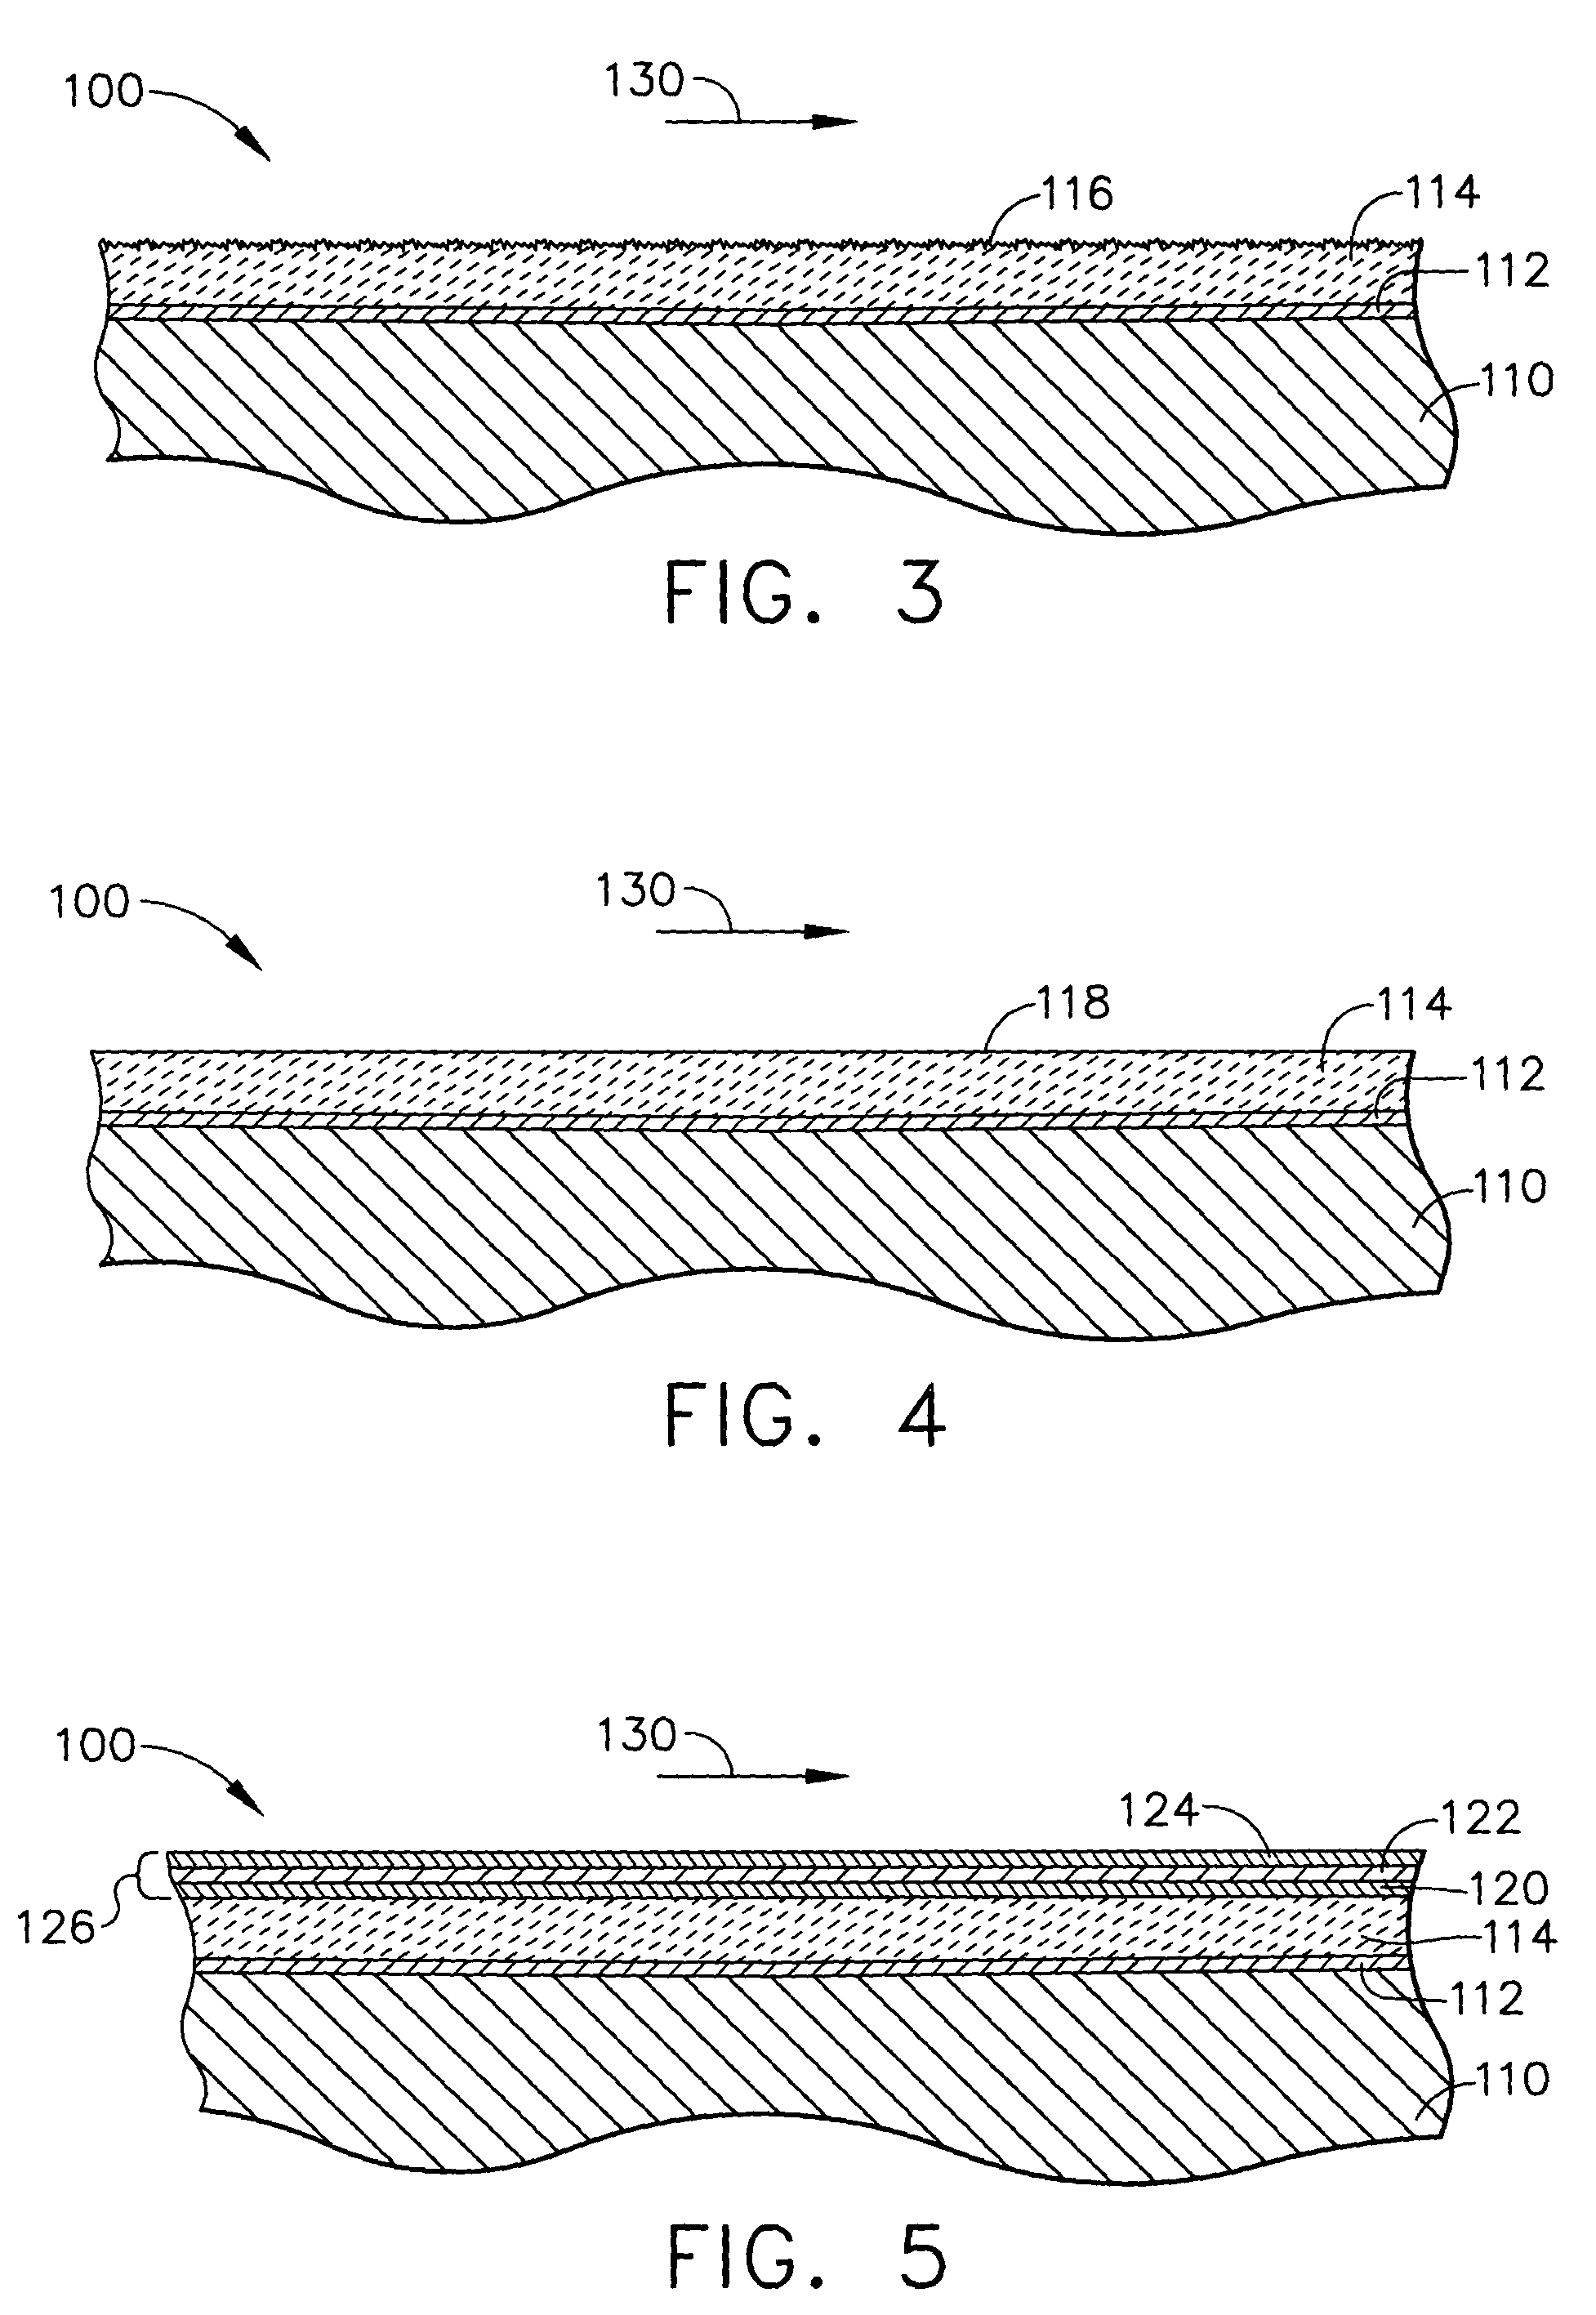 Optical reflector for reducing radiation heat transfer to hot engine parts